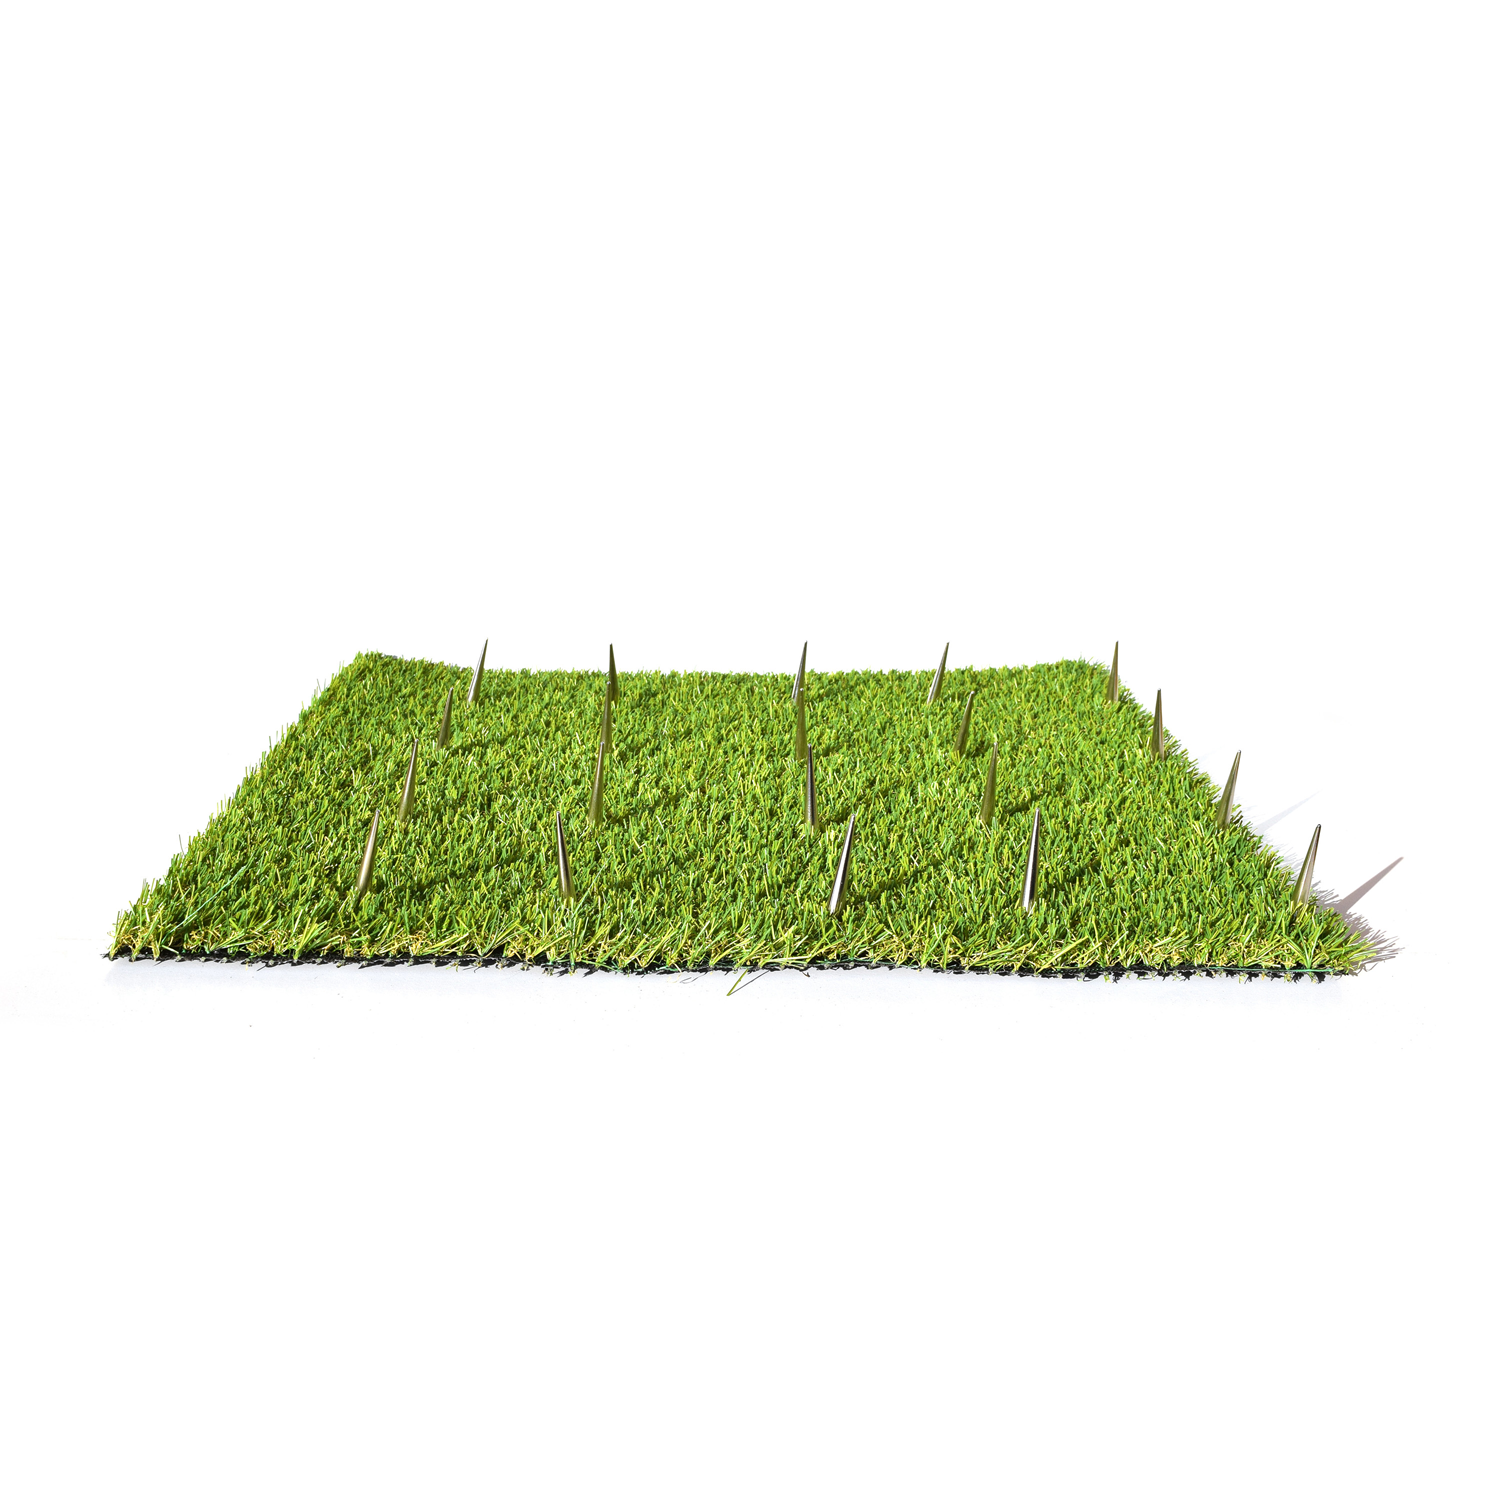 A square piece of synthetic grass with 20 spike studs evenly spaced, sticking out of the grass.